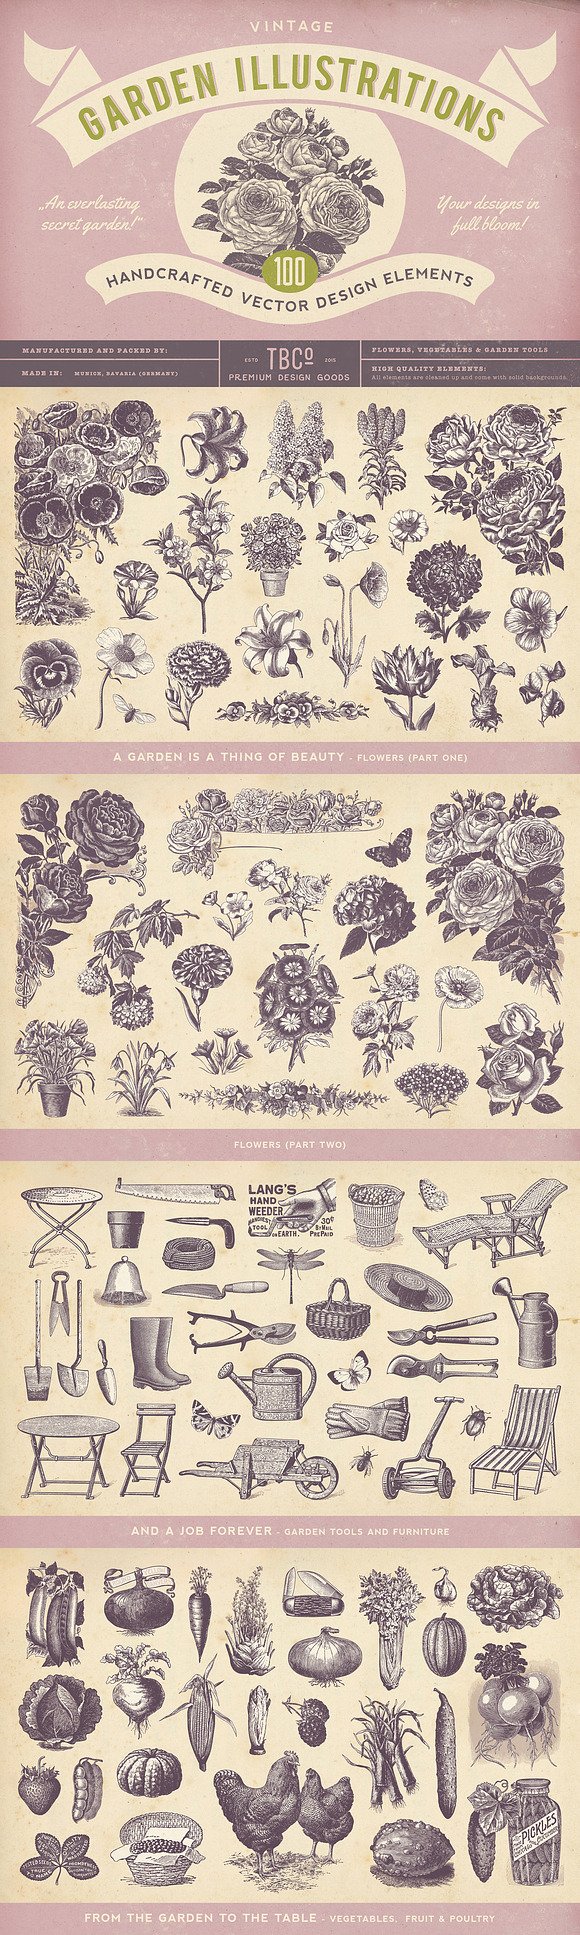 100 Vintage Garden Illustrations in Illustrations - product preview 7